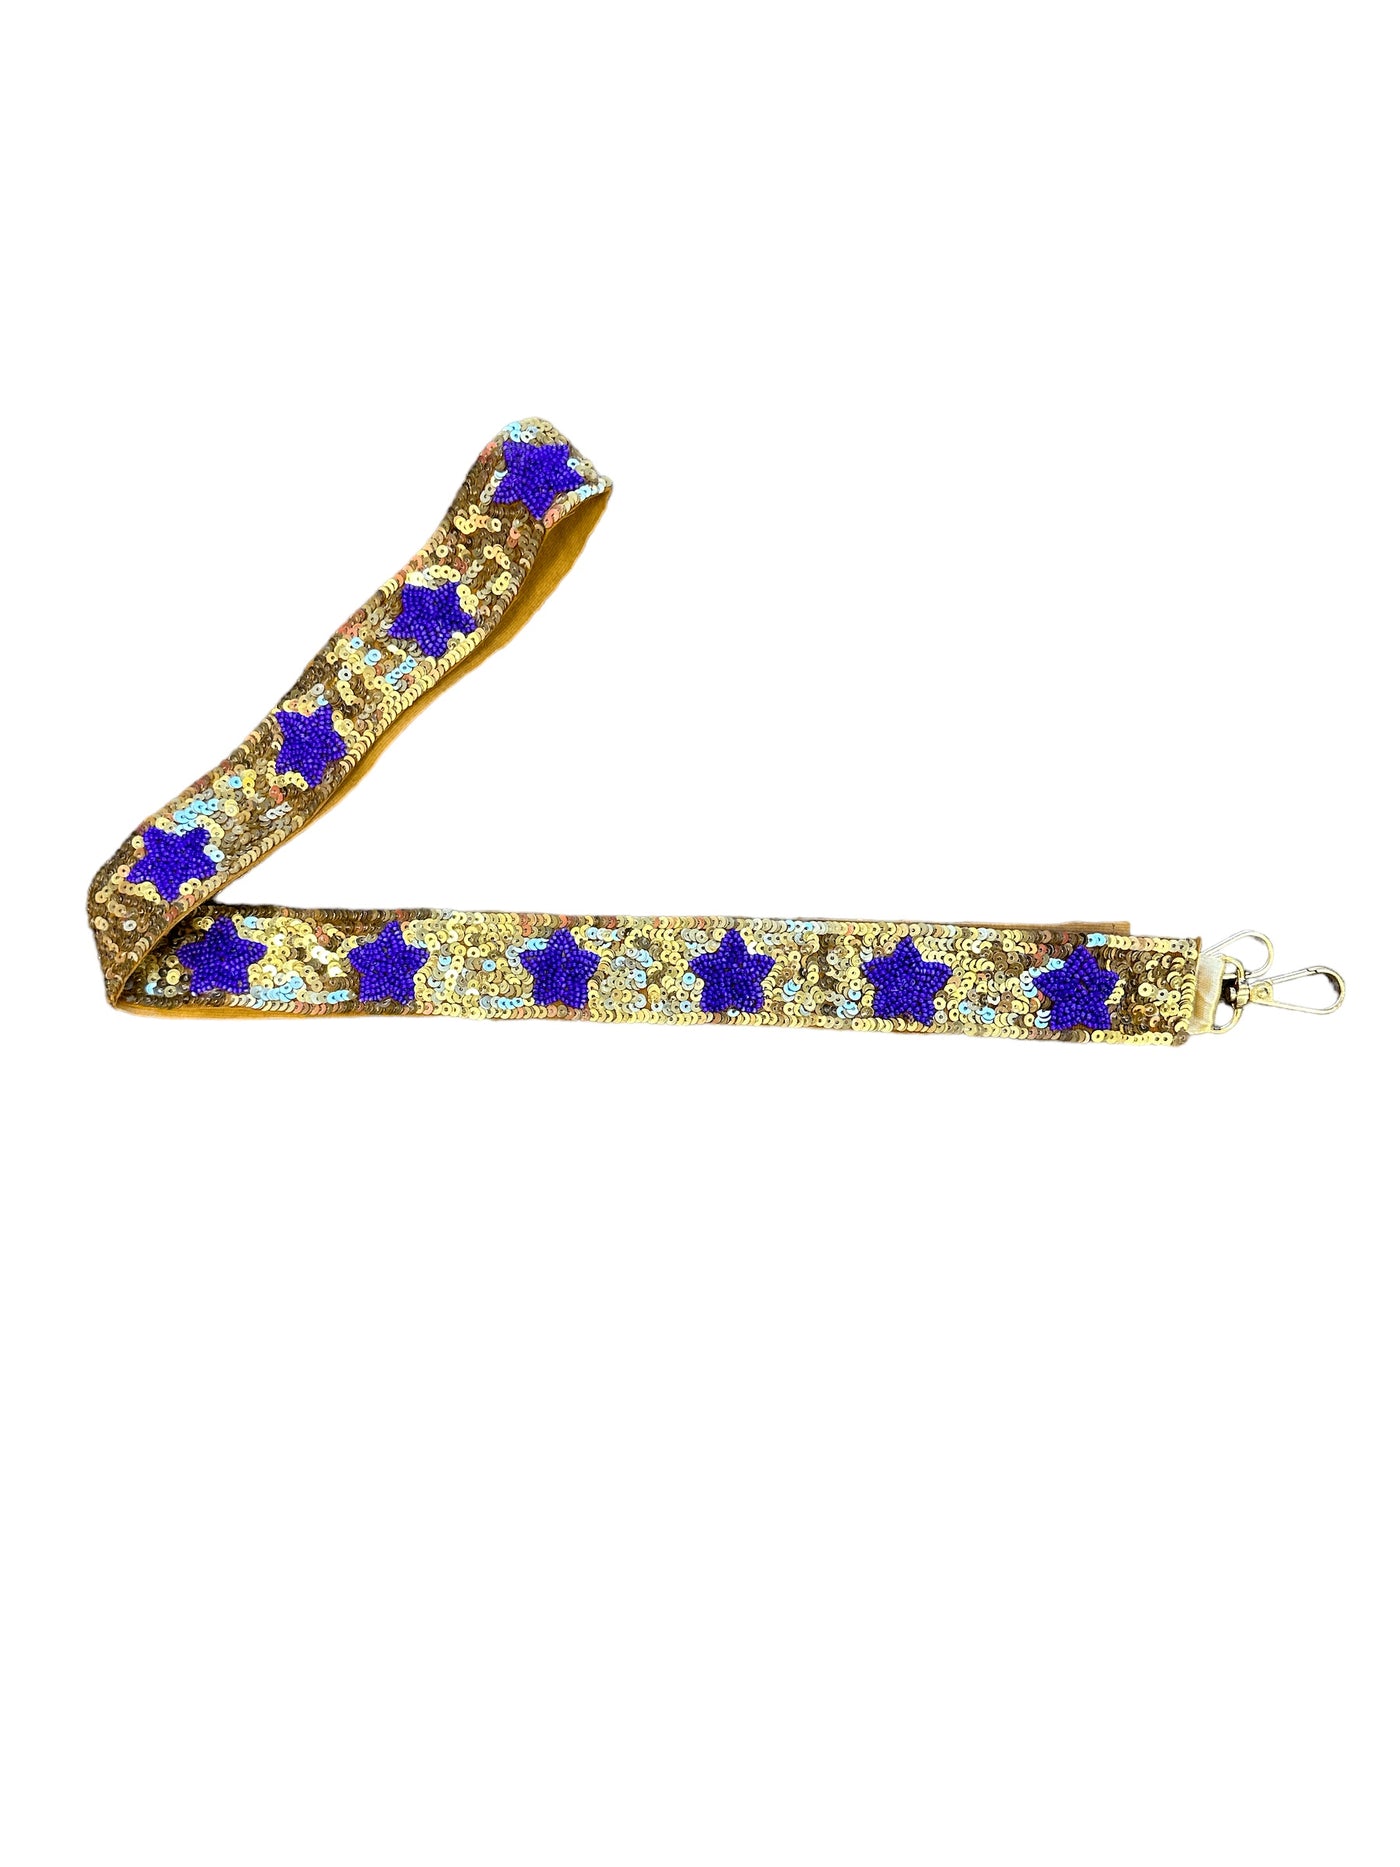 Sequin Bag Strap - Gold with Purple Seed Bead Star